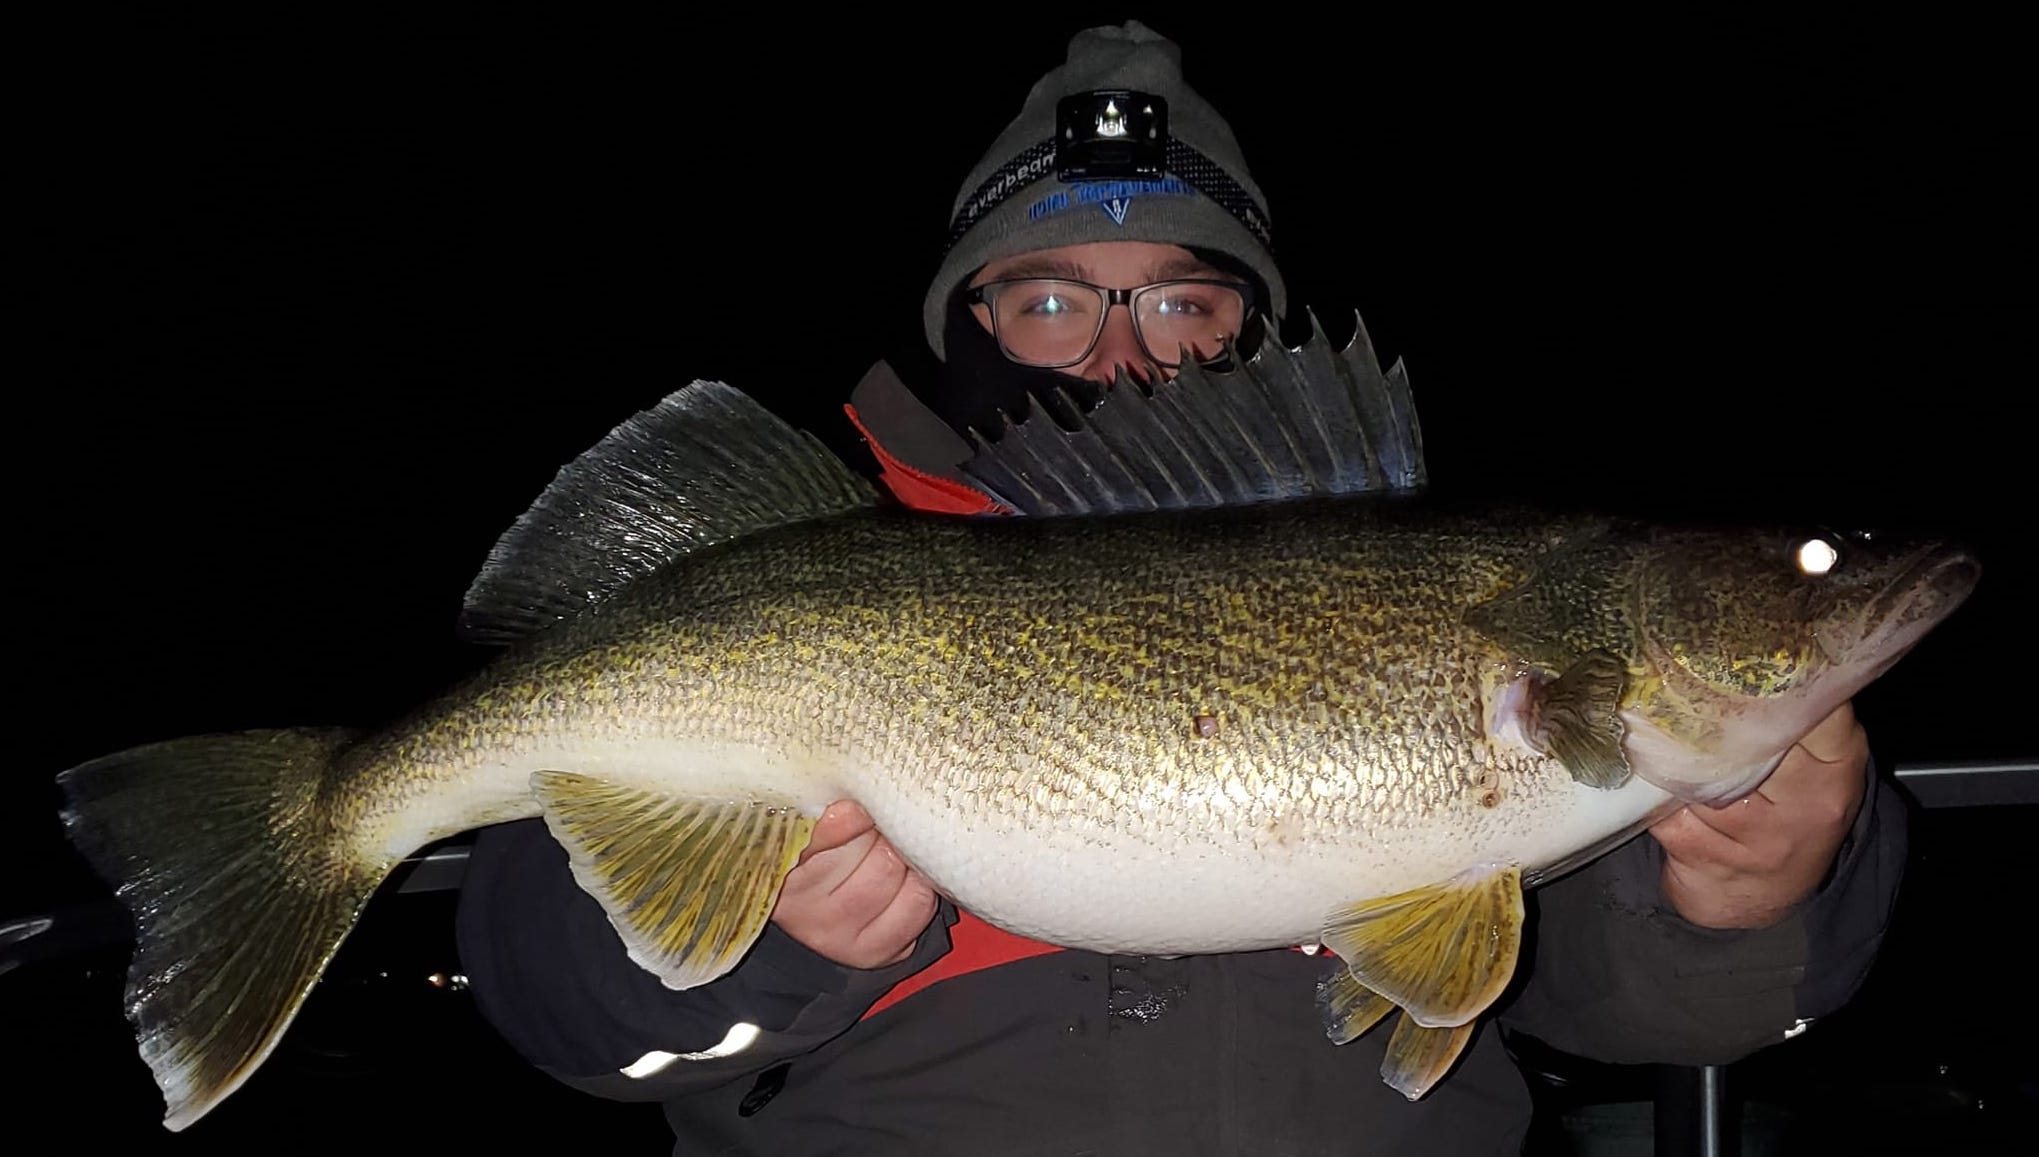 Giant walleye caught 4 times, Don't be a dirtbag rant, How Bro gets buggy –  Target Walleye